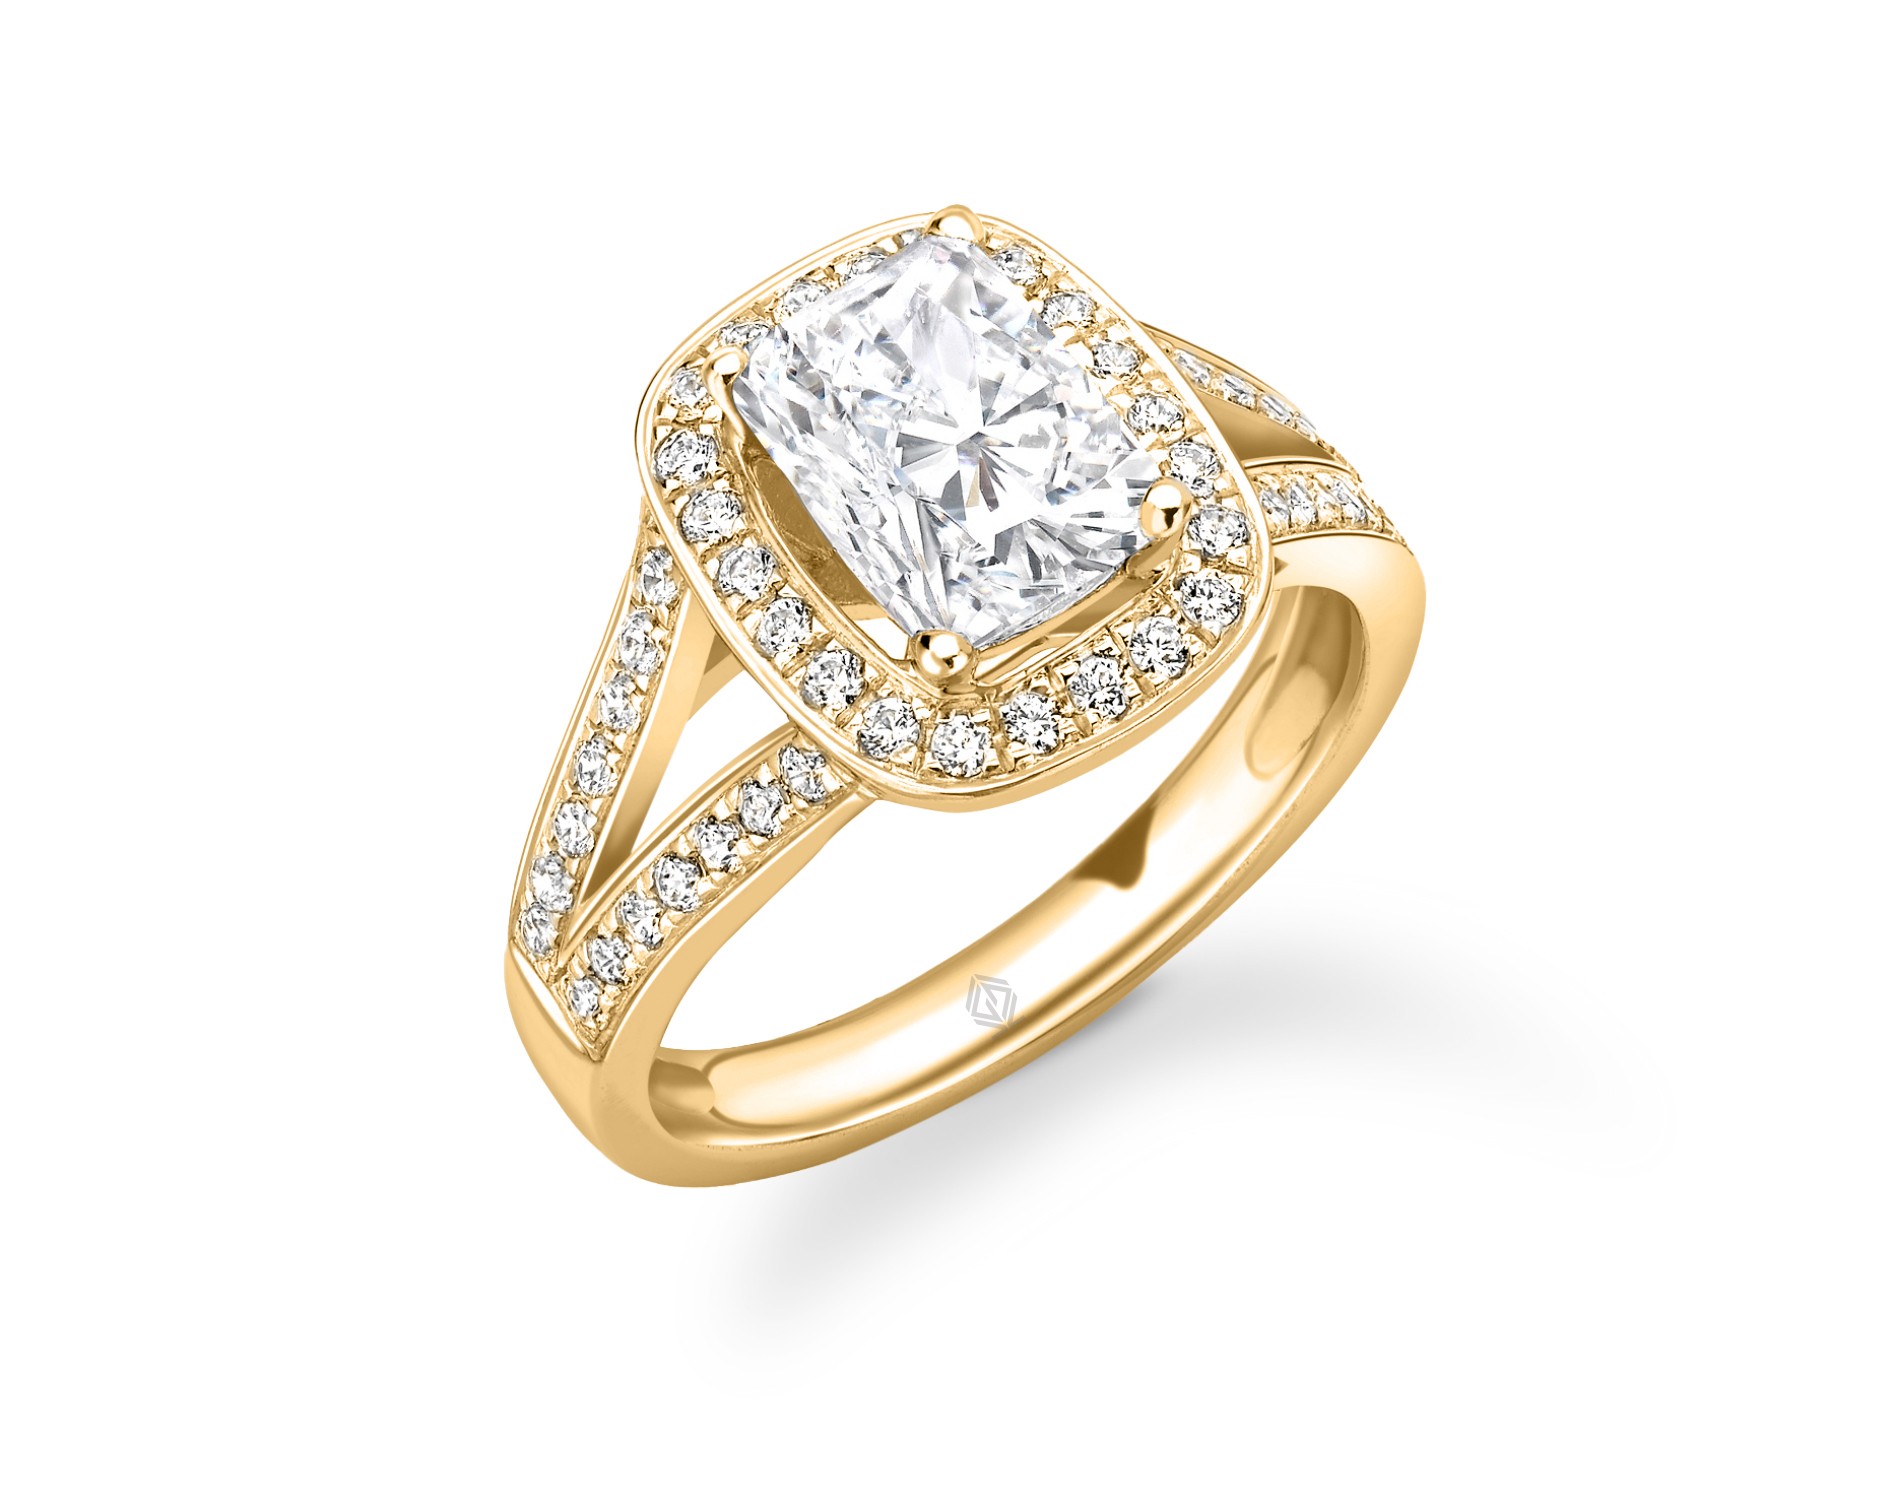 18K YELLOW GOLD LONG CUSHION CUT HALO DIAMOND ENGAGEMENT RING WITH SIDE STONES IN SPLIT SHANK CHANNEL SET